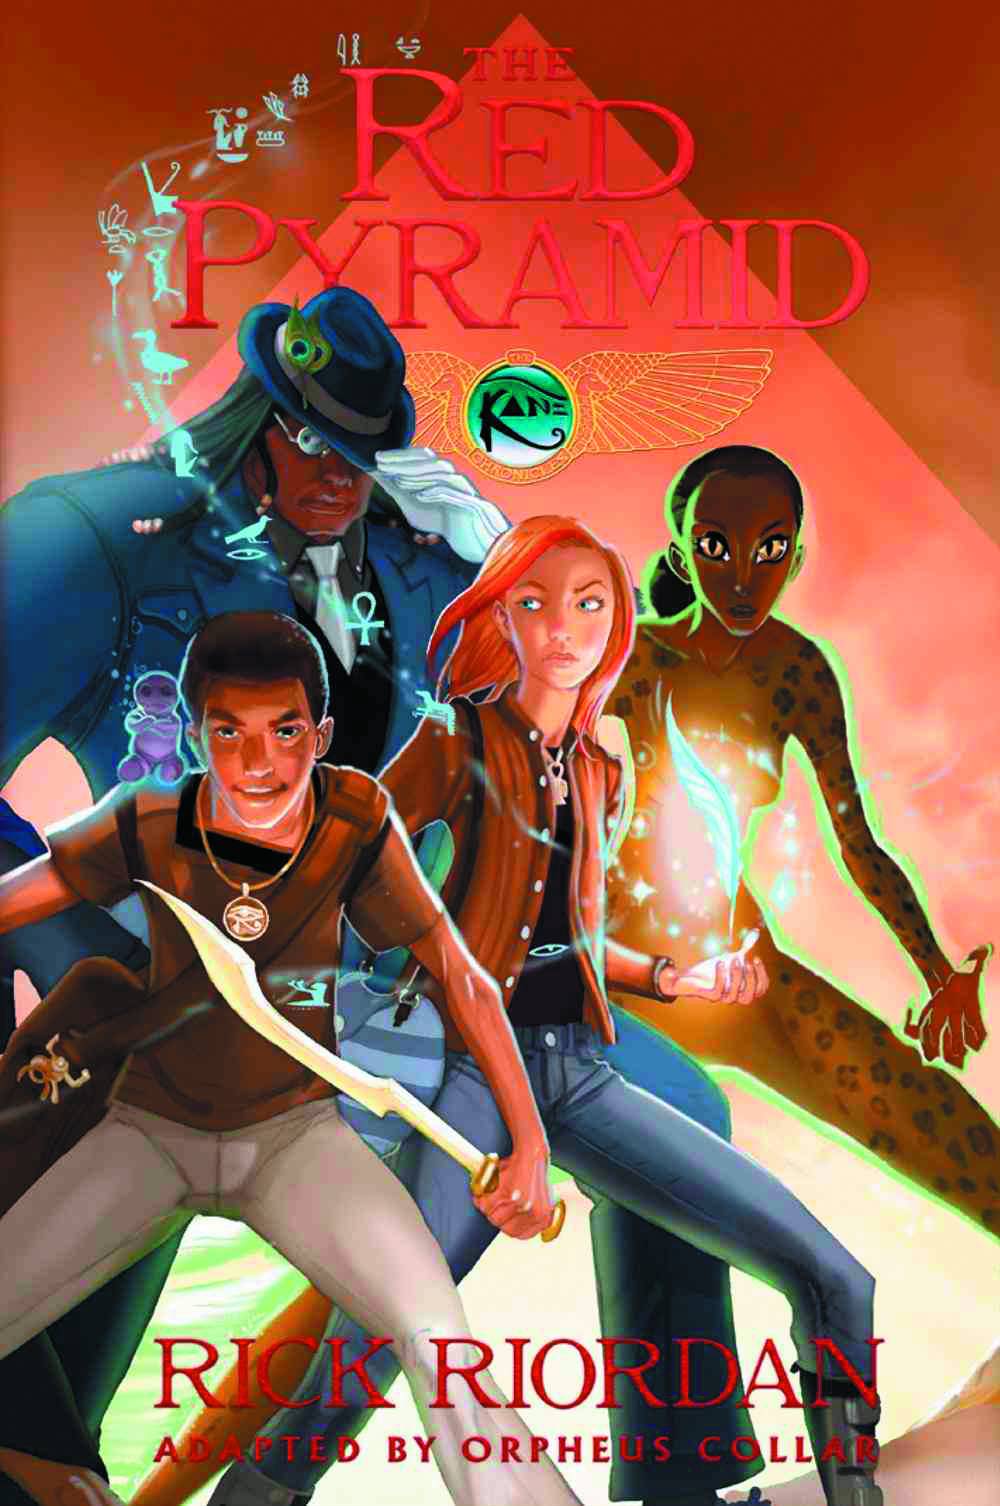 Kane Chronicles Graphic Novel Book 01 Red Pyramid